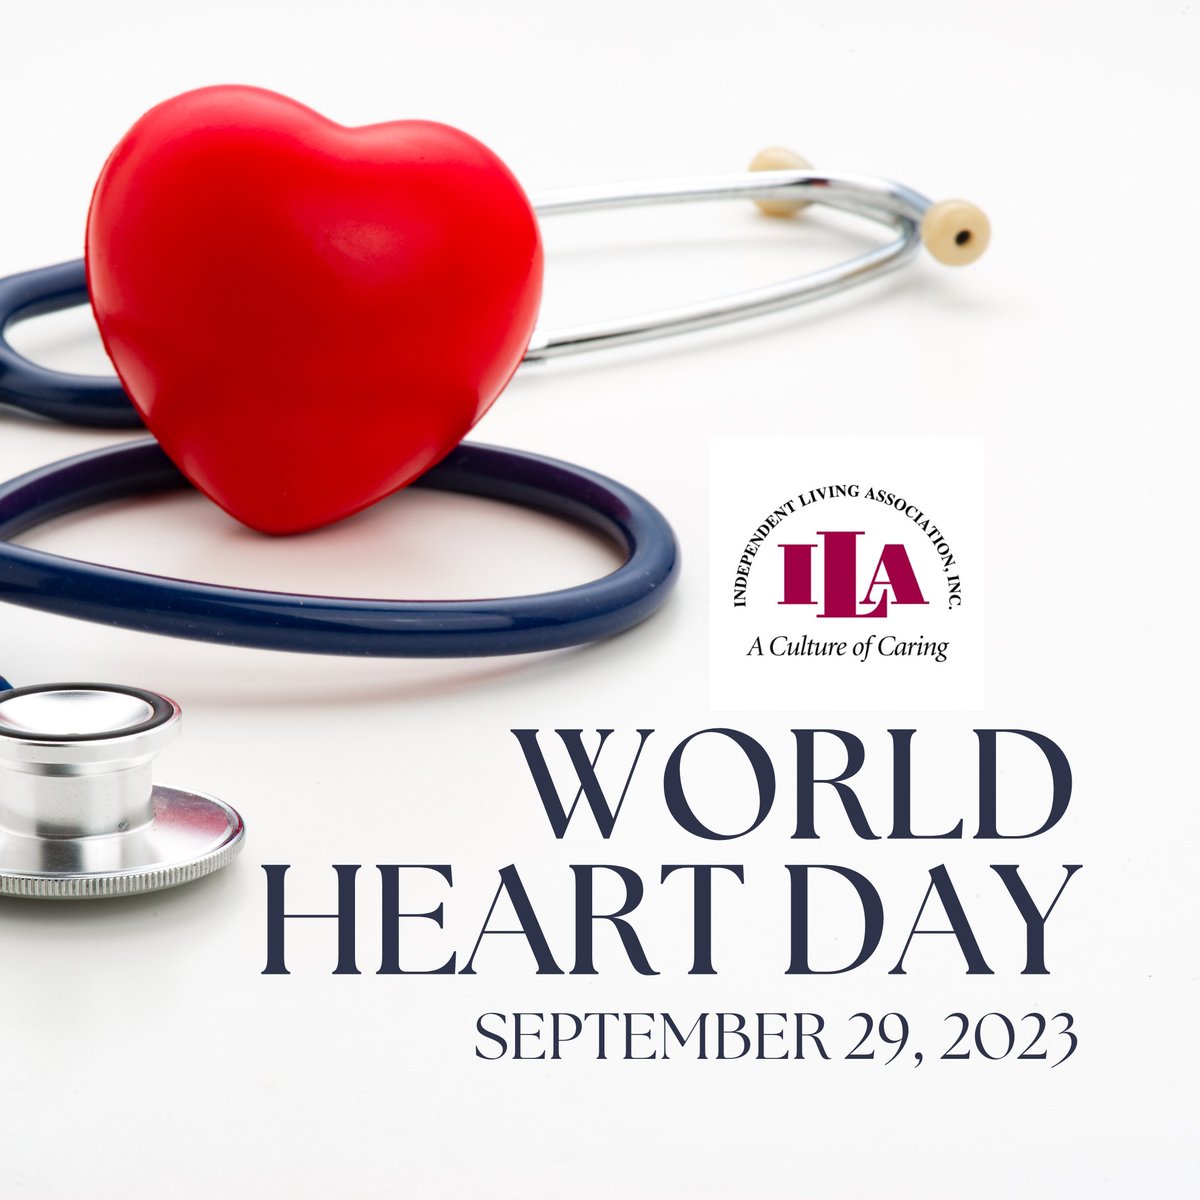 Today is #WorldHeartDay! ILA’s Director of Nursing, Dr. Sindiswa Akinbo, offers helpful tips to enhance cardiovascular health for Individuals with intellectual and developmental disabilities: ilaonline.org/guide-to-heart…
#HeartHealth #ILA #Nonprofit #CultureOfCaring